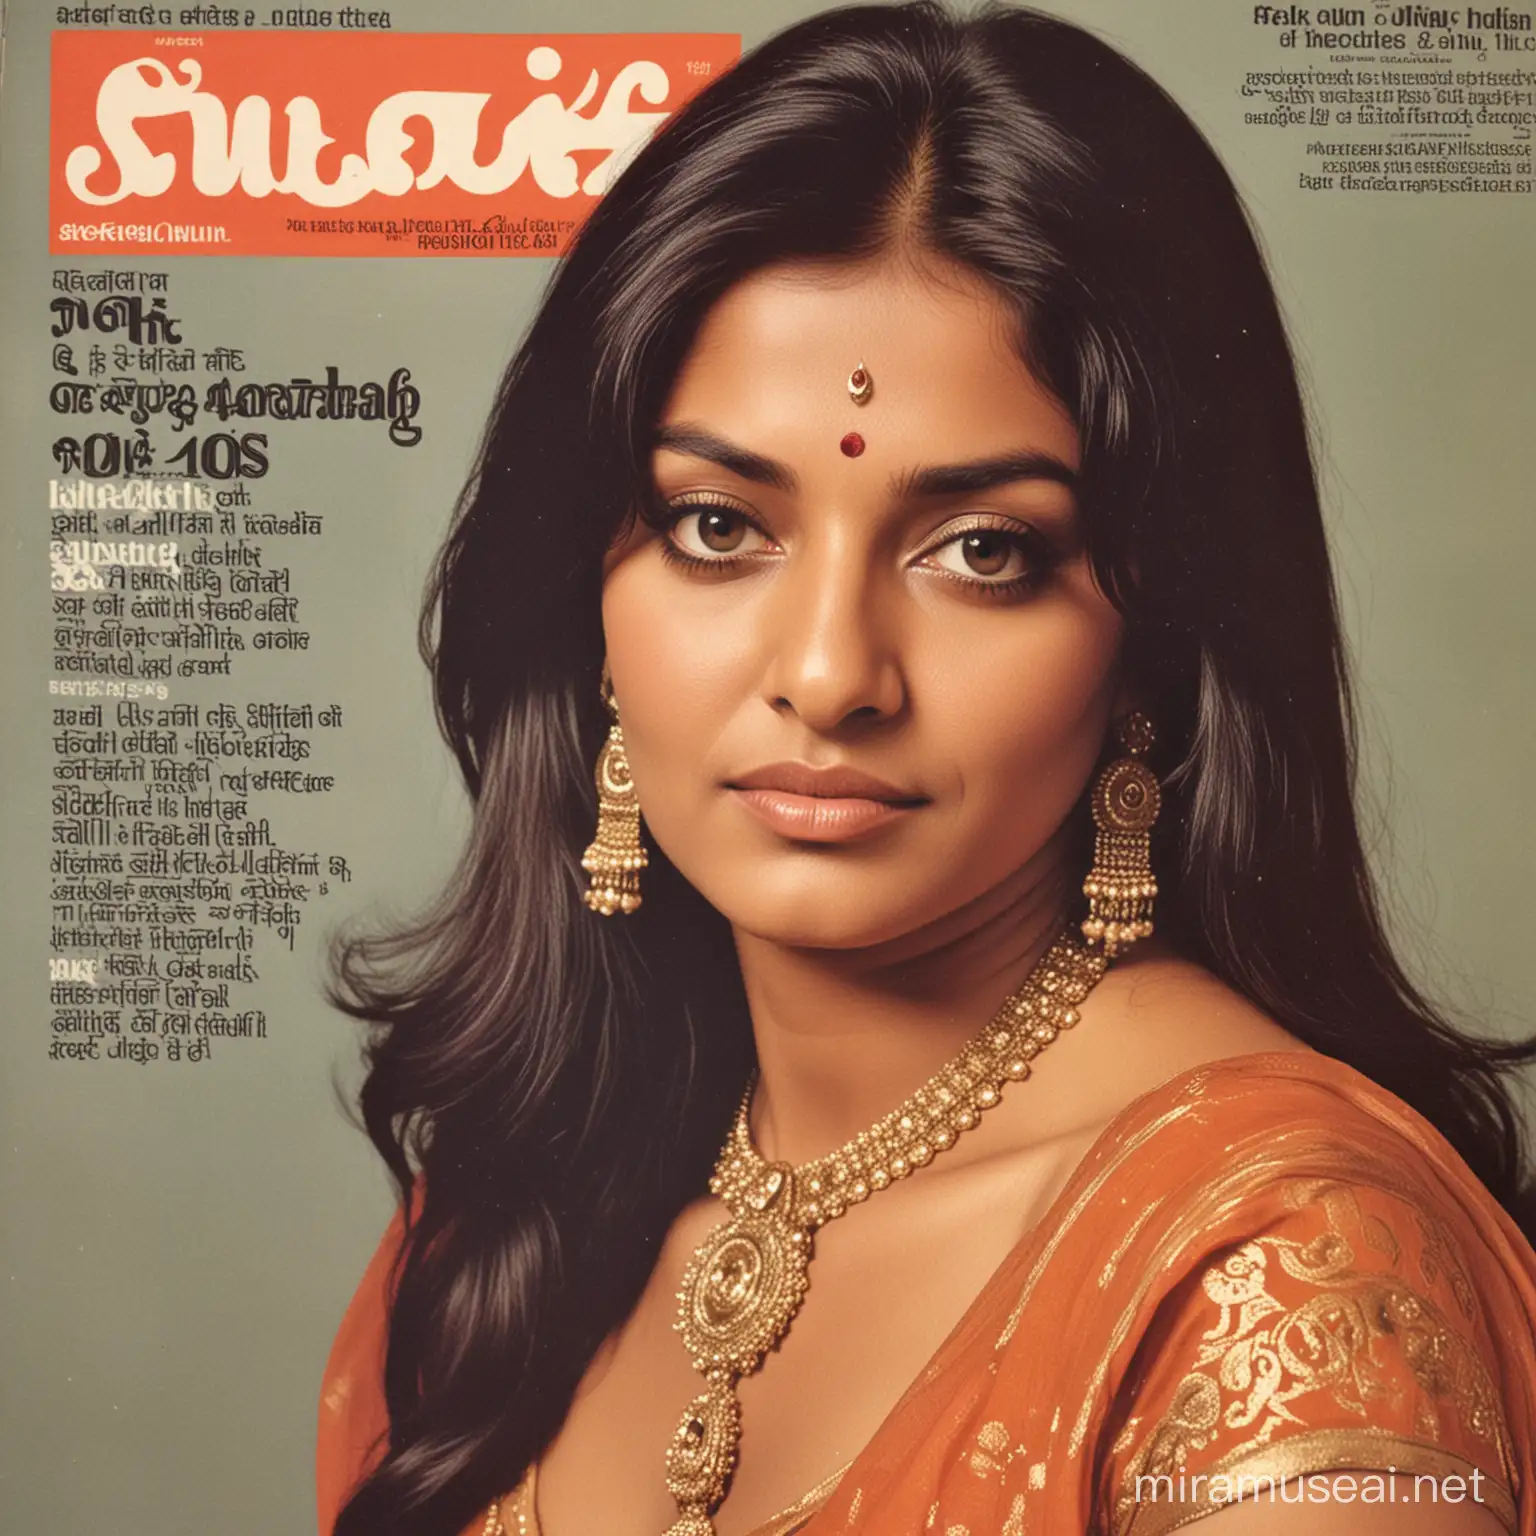 fake indian celebrity in the 70s 
Magazine
